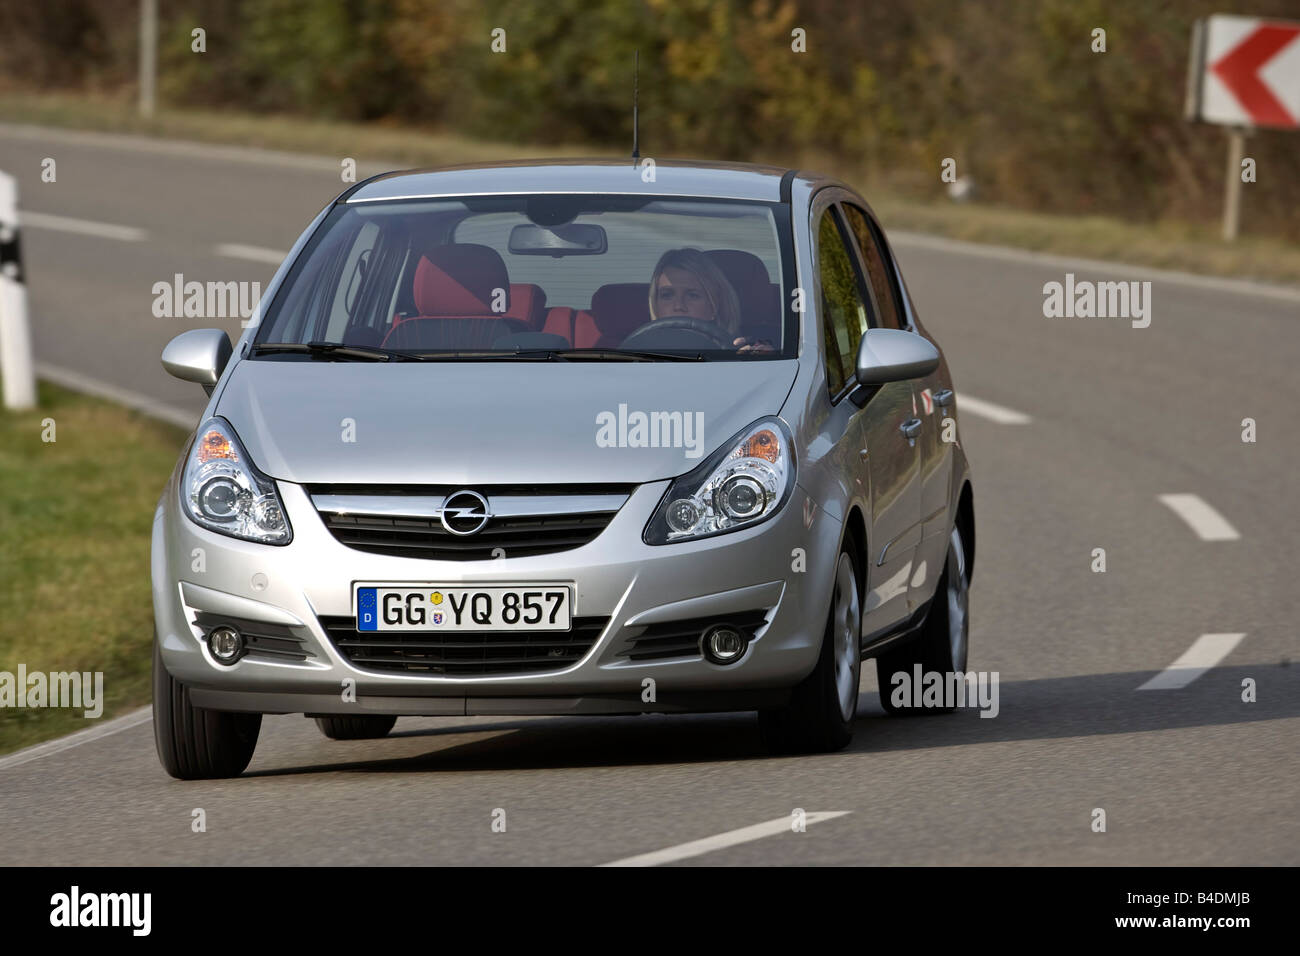 Opel Corsa 1 2 Edition High Resolution Stock Photography and Images - Alamy